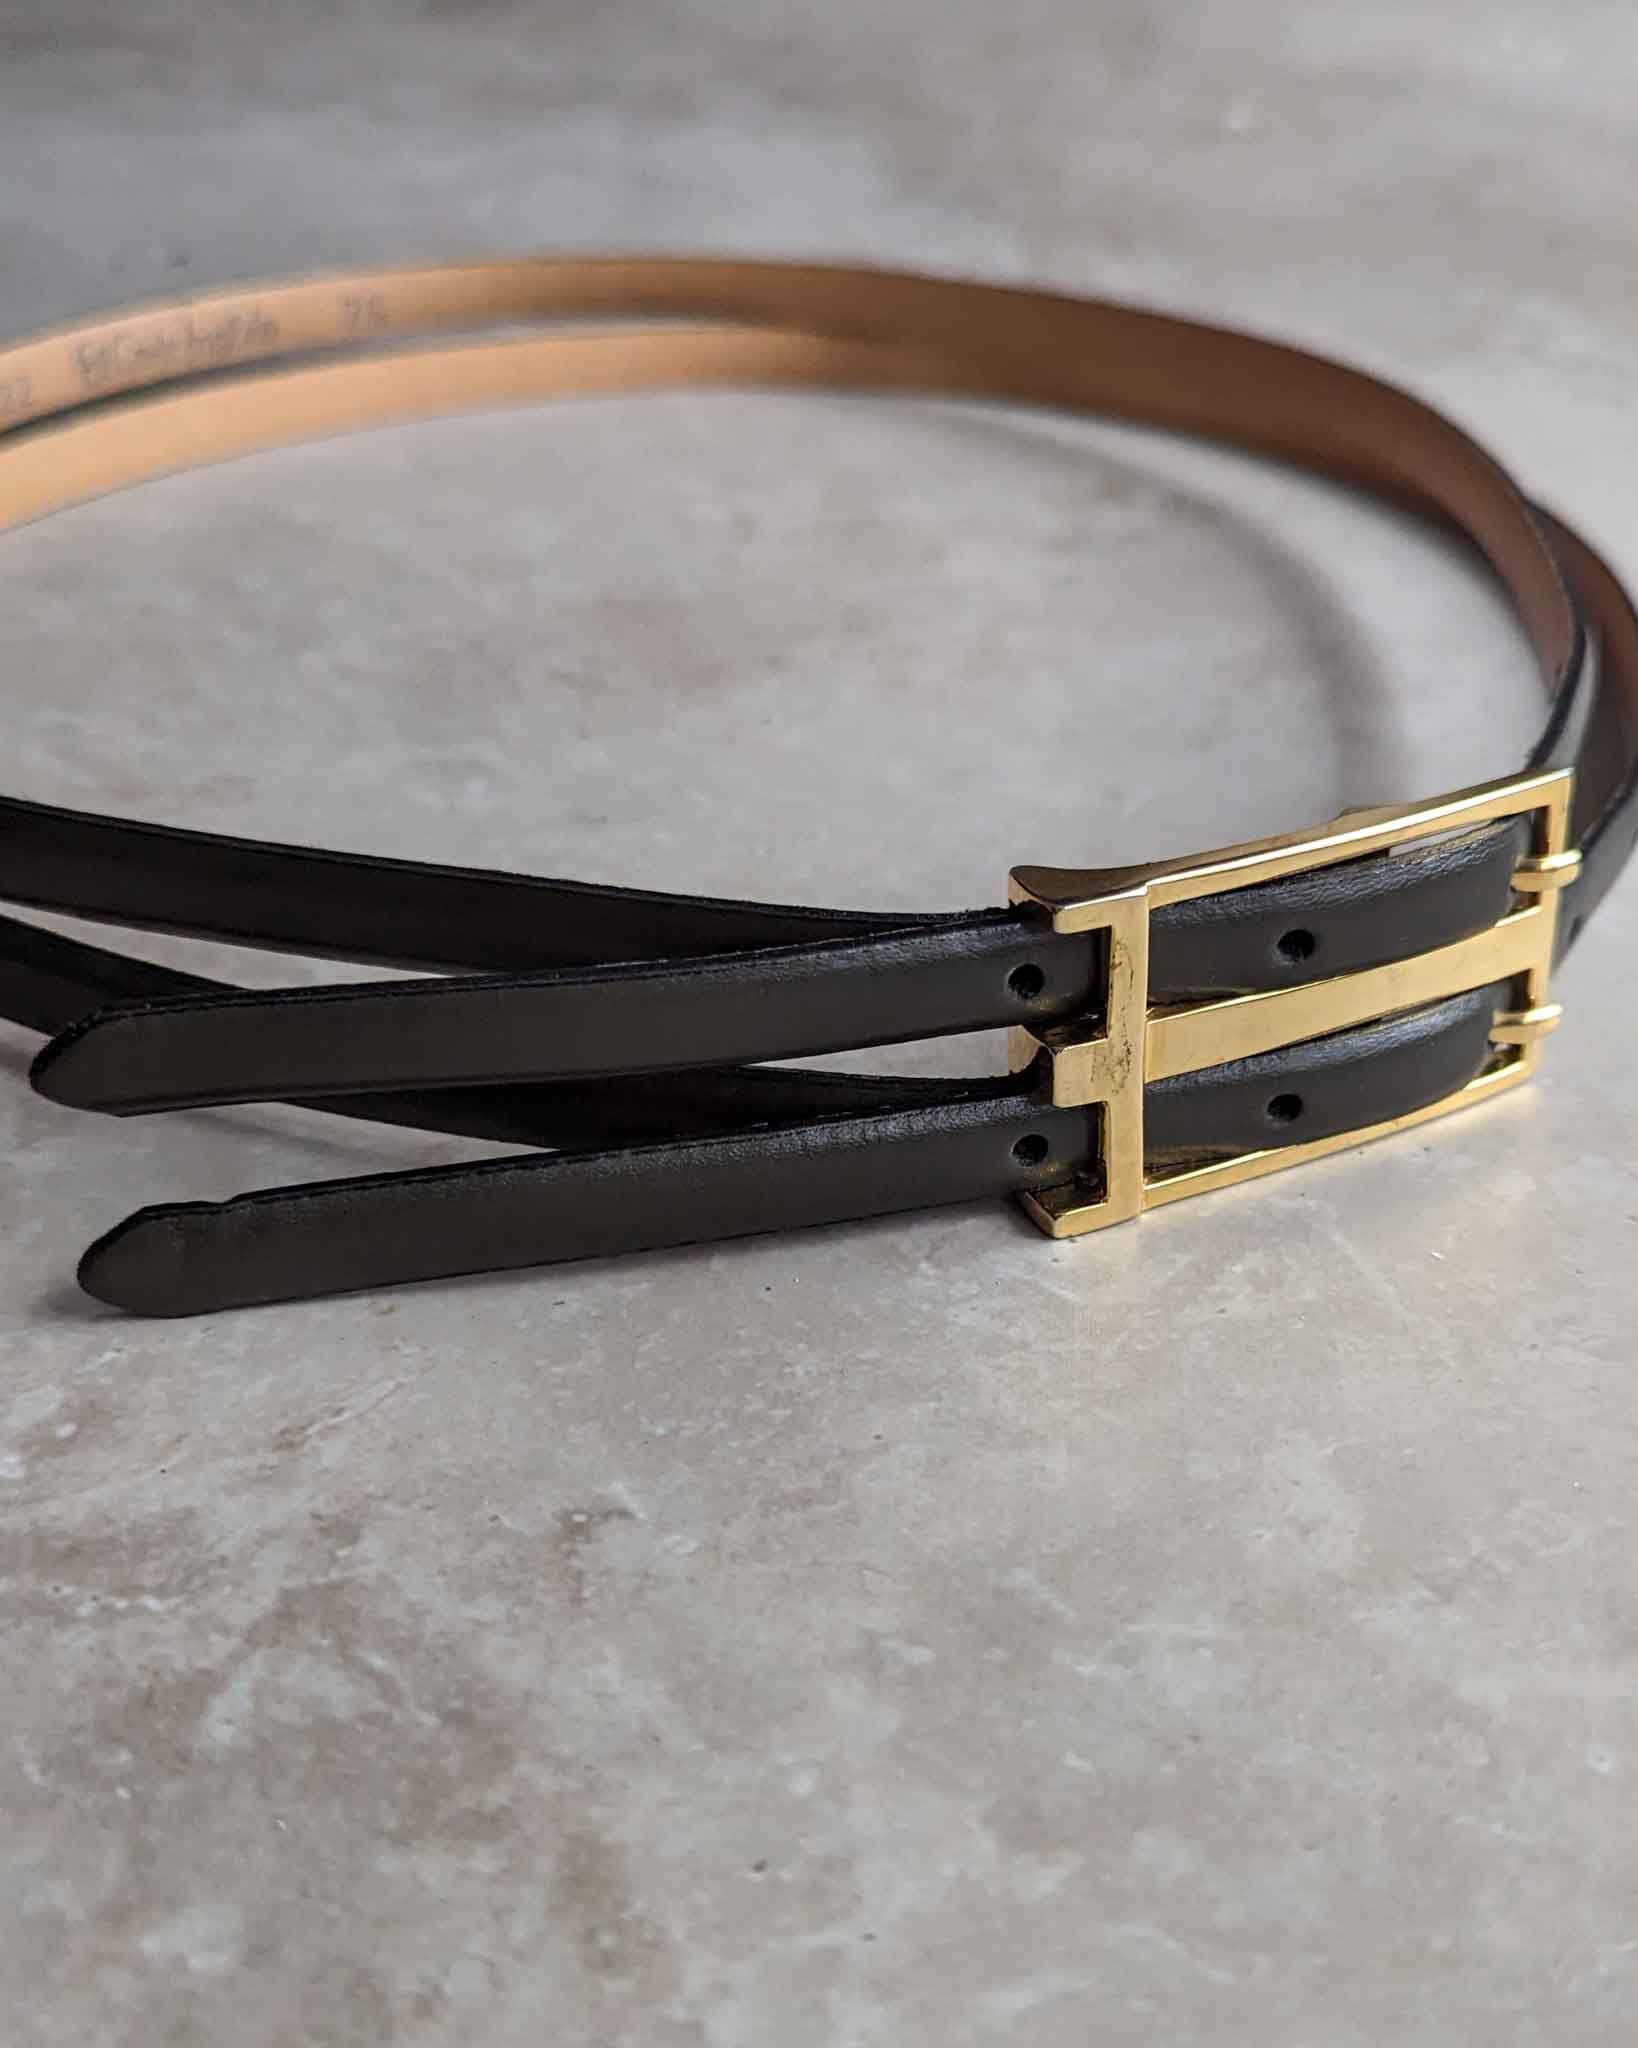 70s Olive Double Buckle Belt